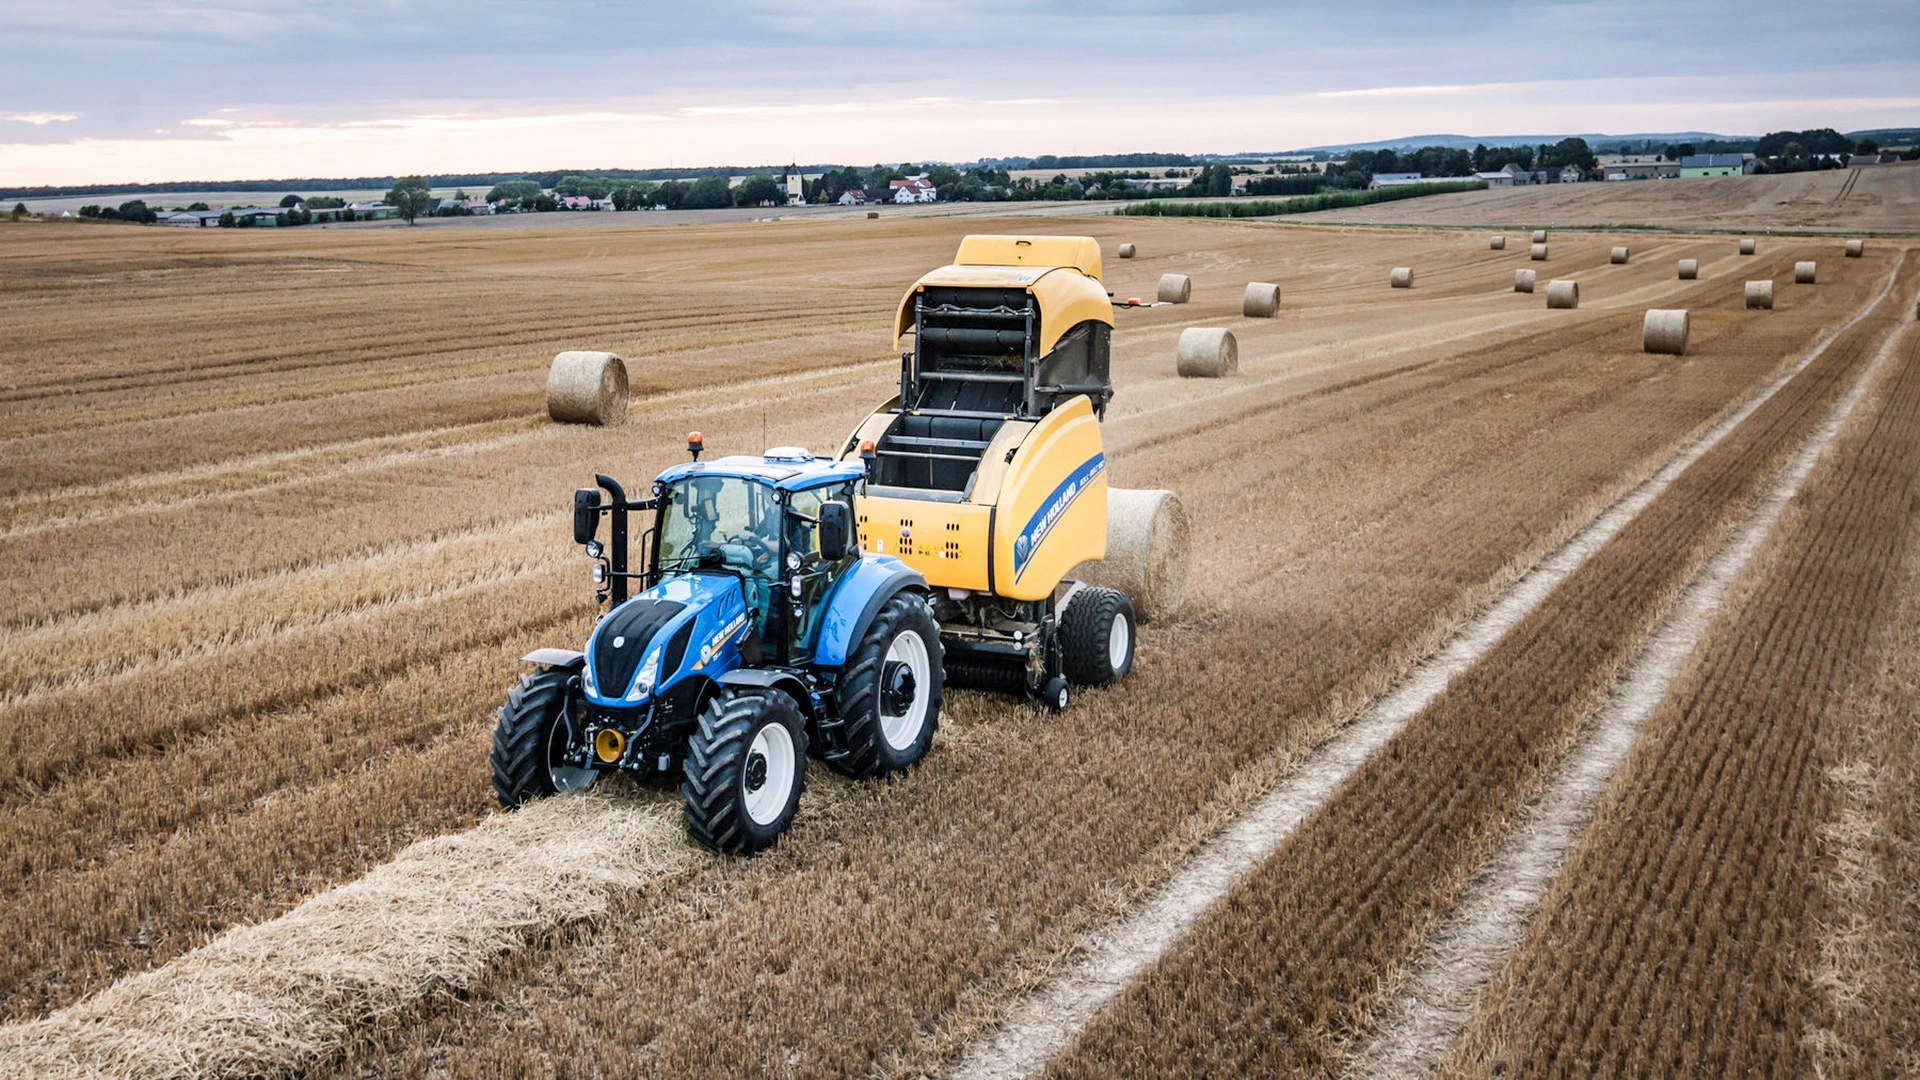 Tractor in action, operating a Roll-Belt round baler on an expansive agricultural field